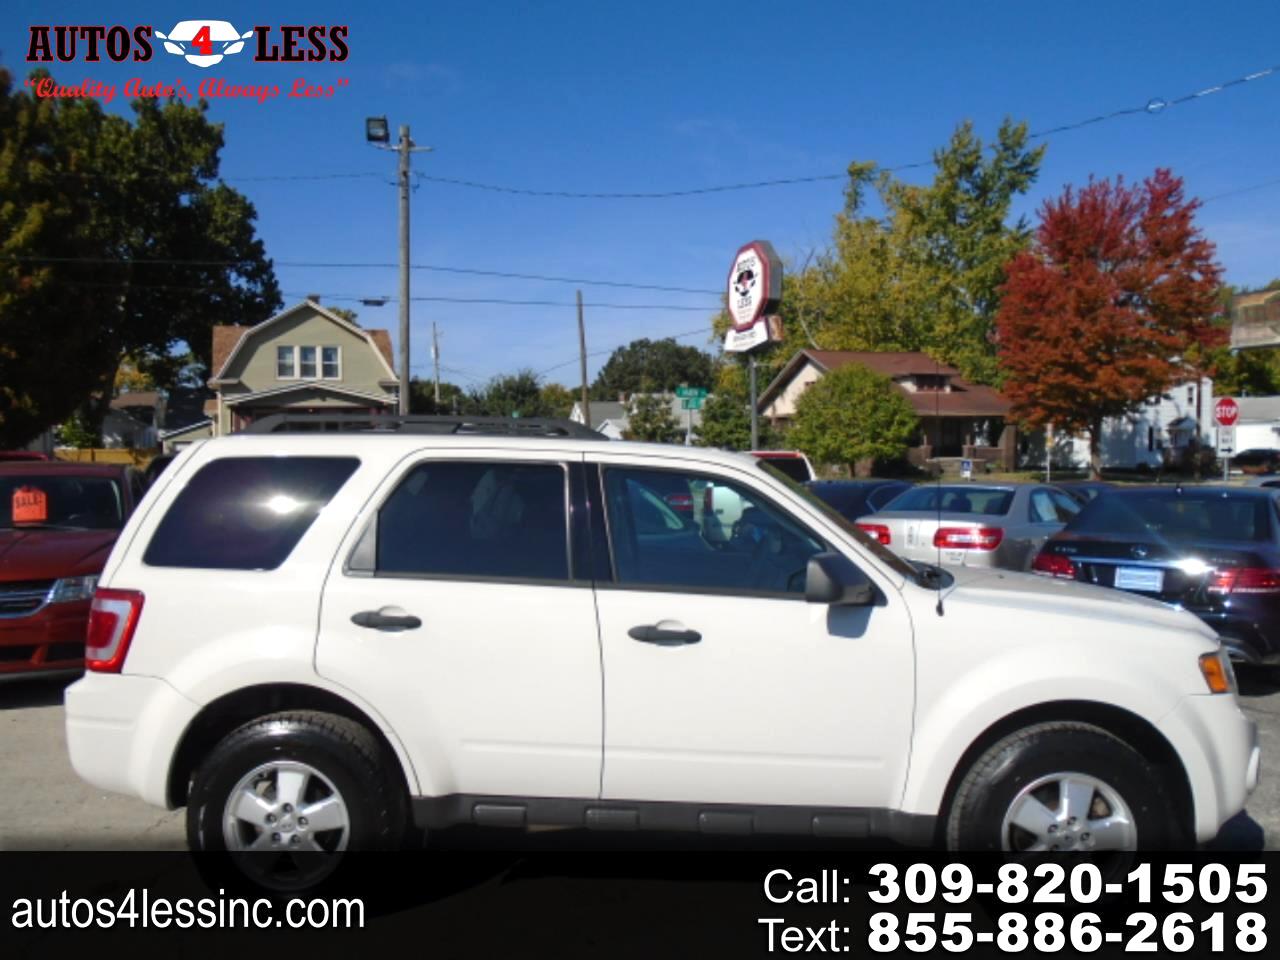 Ford Escape FWD 4dr XLT 2011